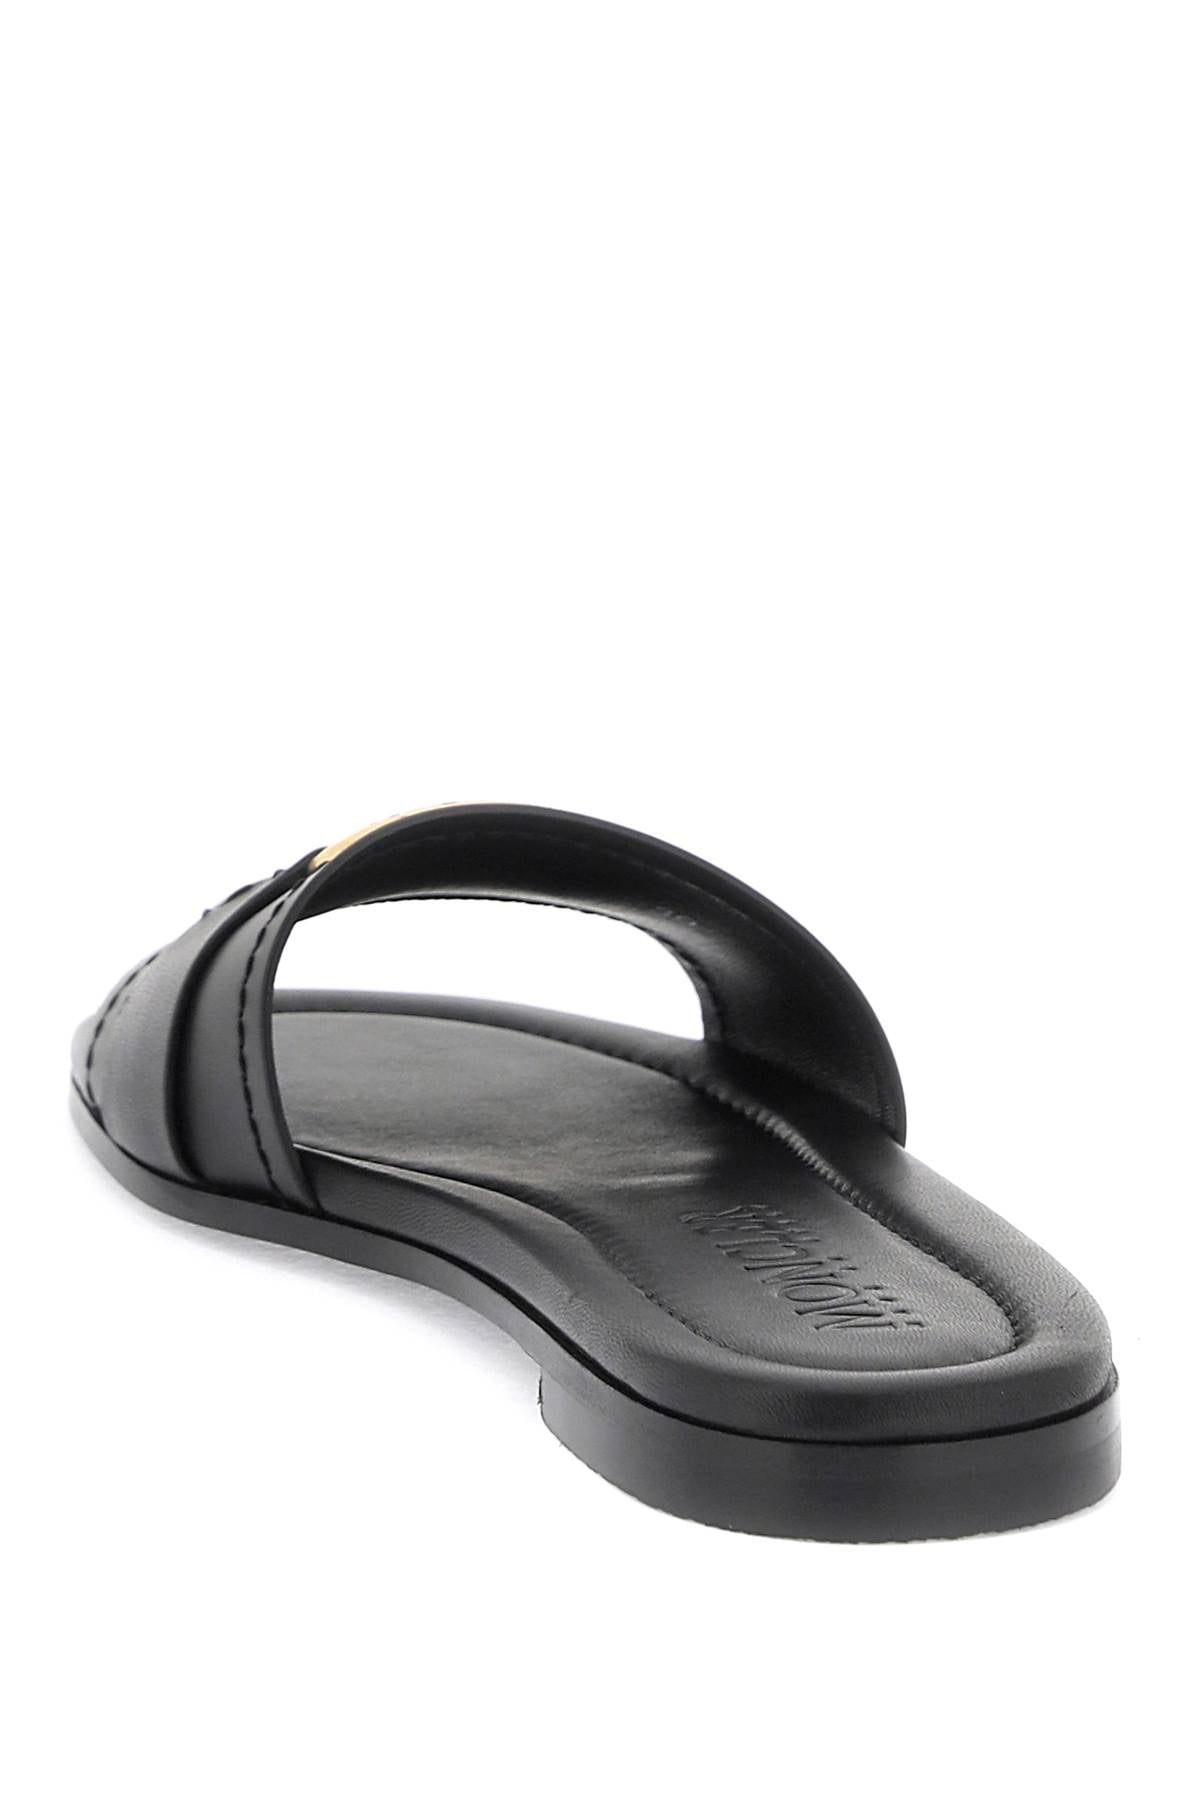 MONCLER Black Calfskin Slide for Women Featuring a Round Toe and Gold Metal Ring Band with Engraved Logo